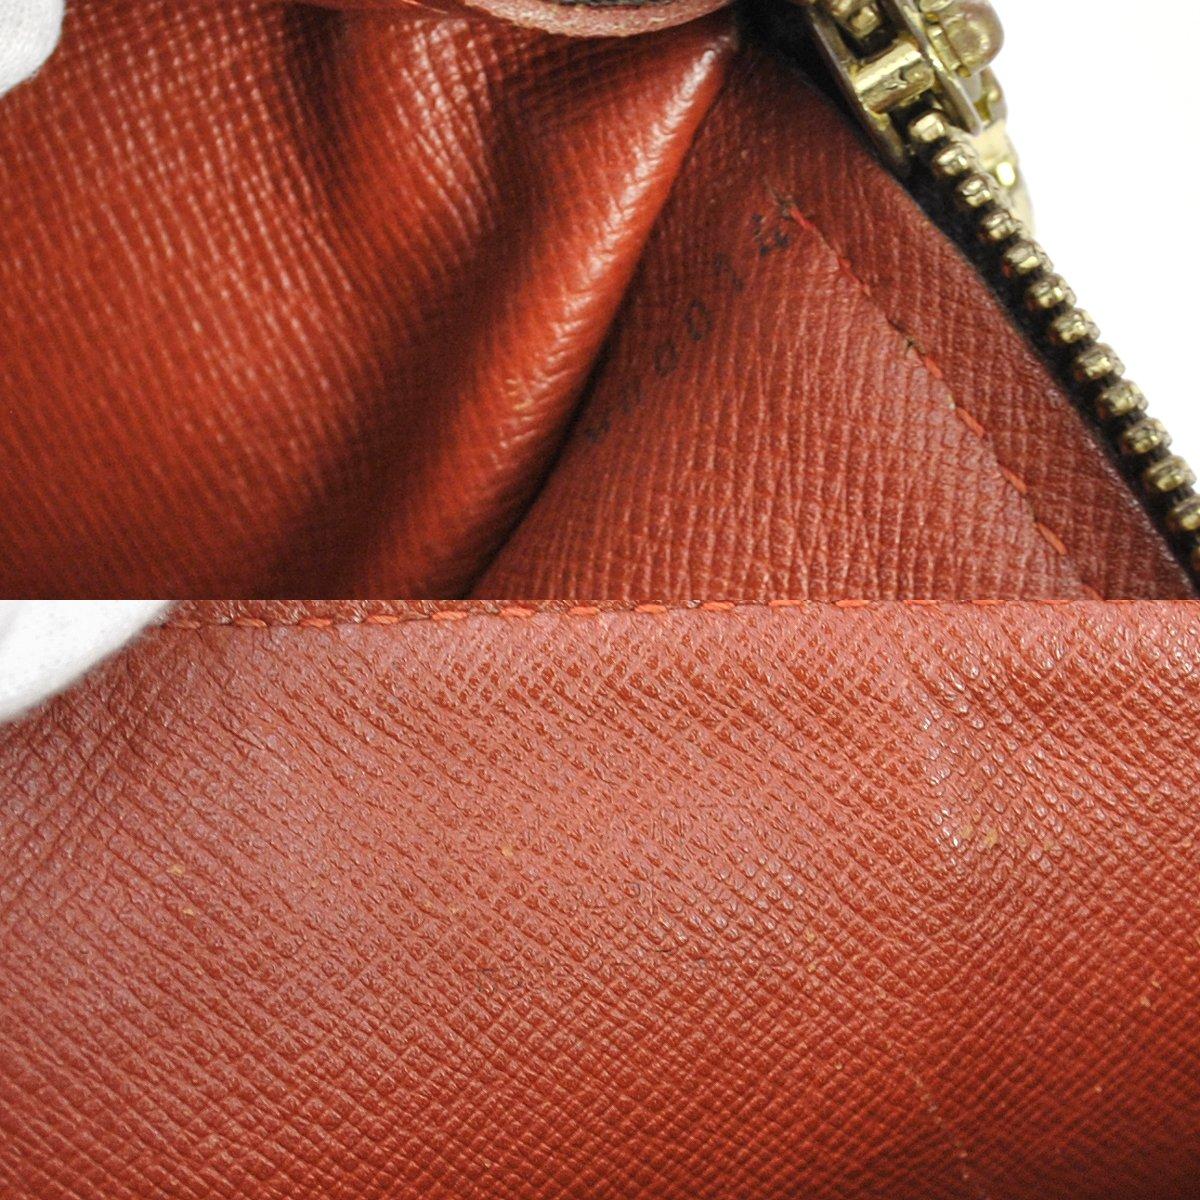 Authenticate This LOUIS VUITTON - READ 1ST POST BEFORE POSTING! | PurseForum